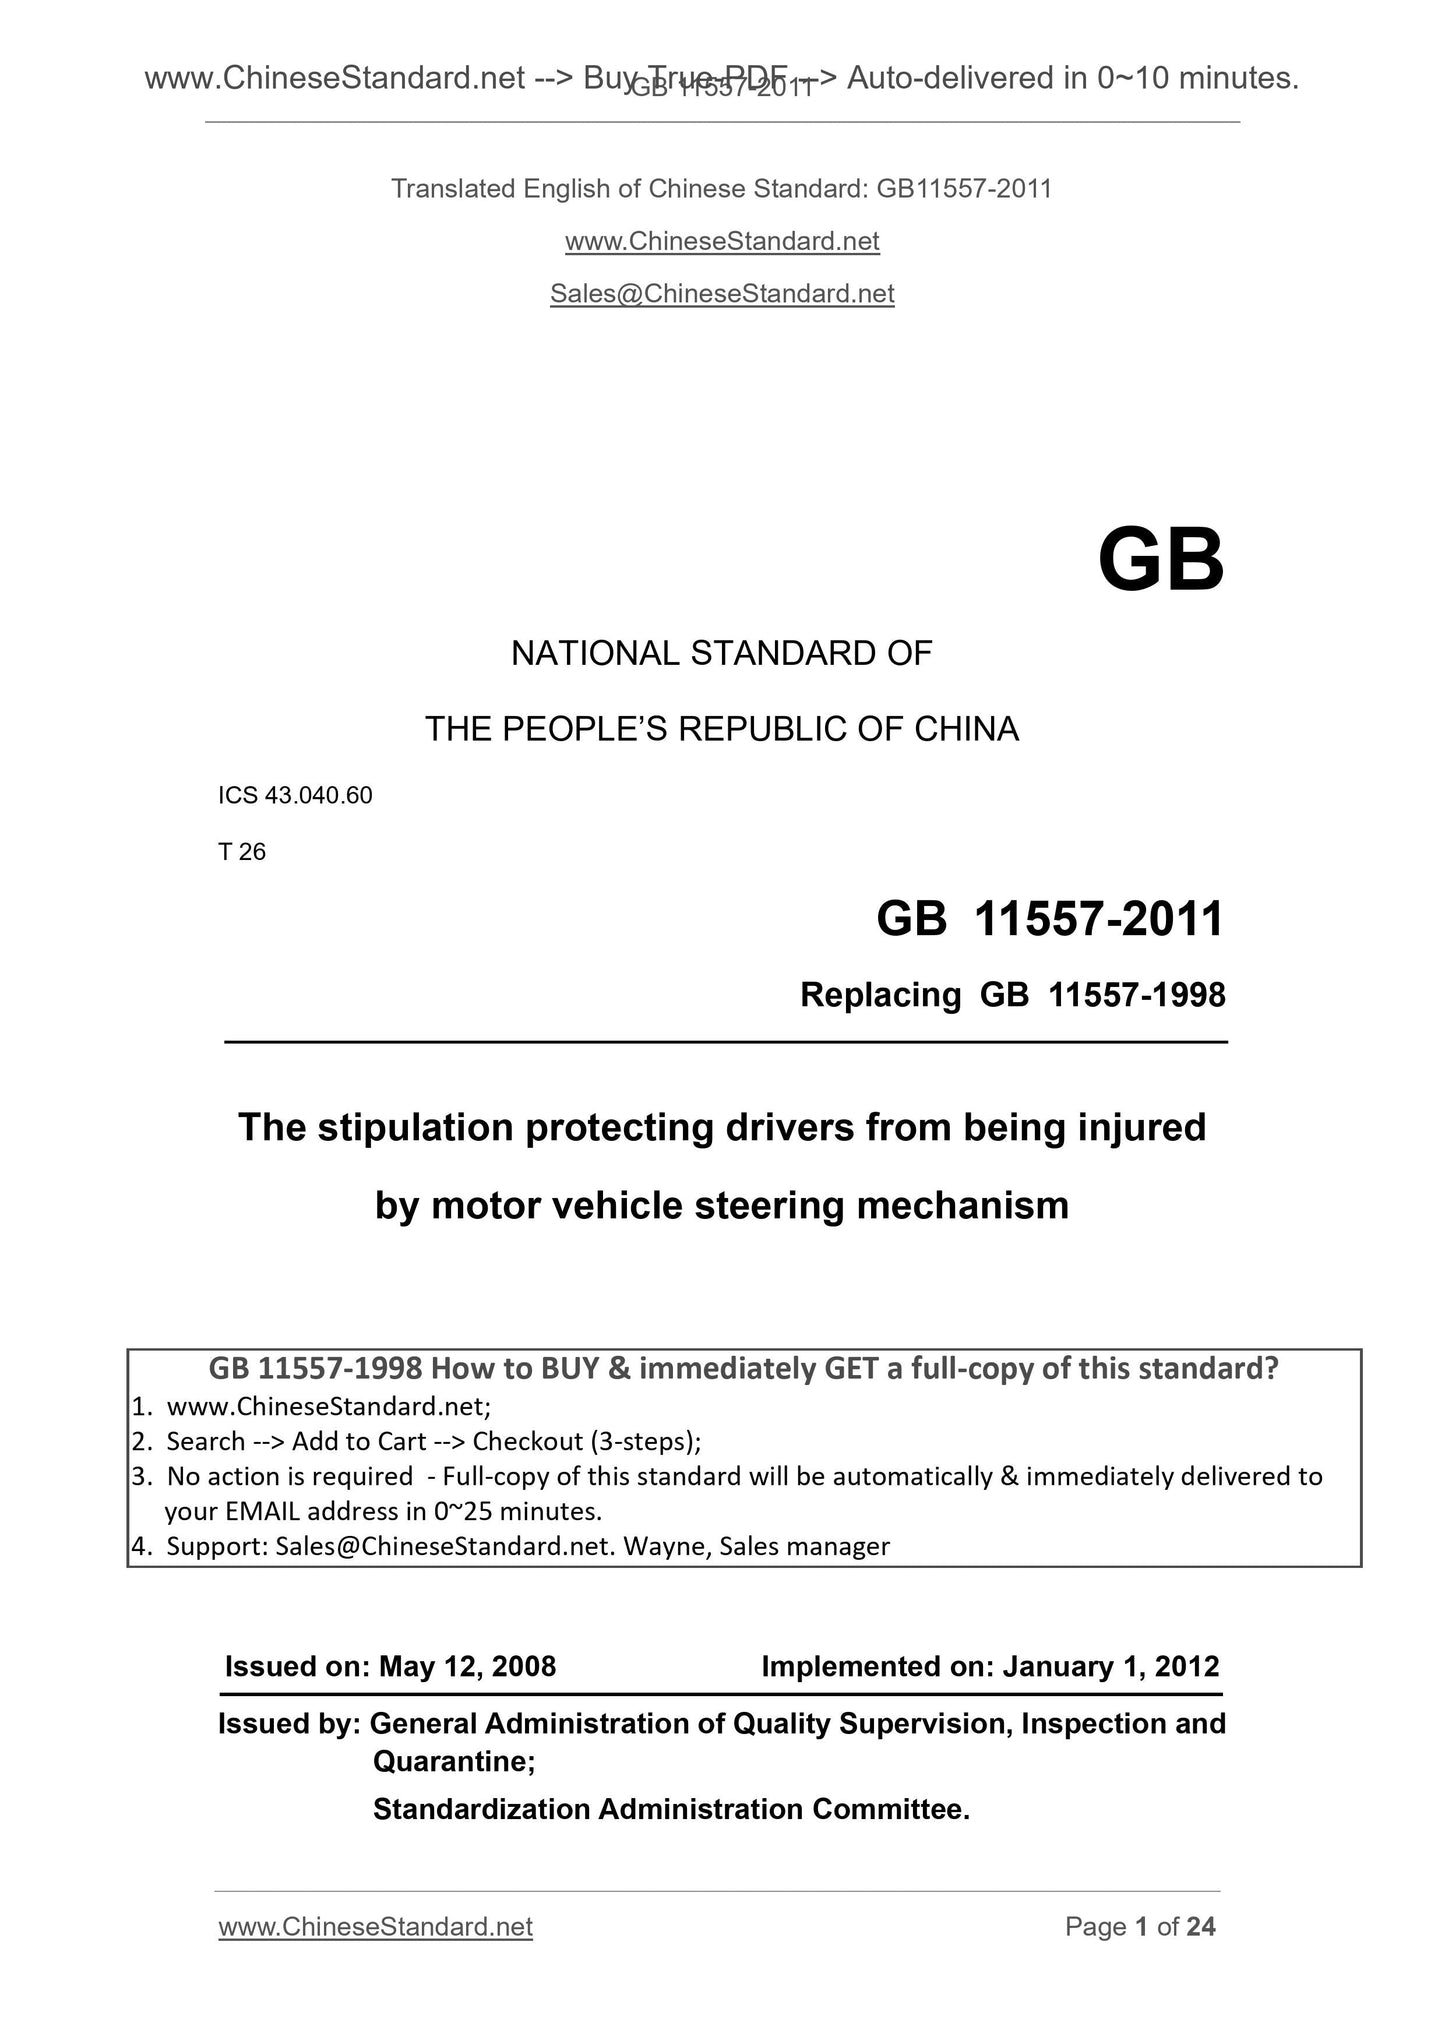 GB 11557-2011 Page 1